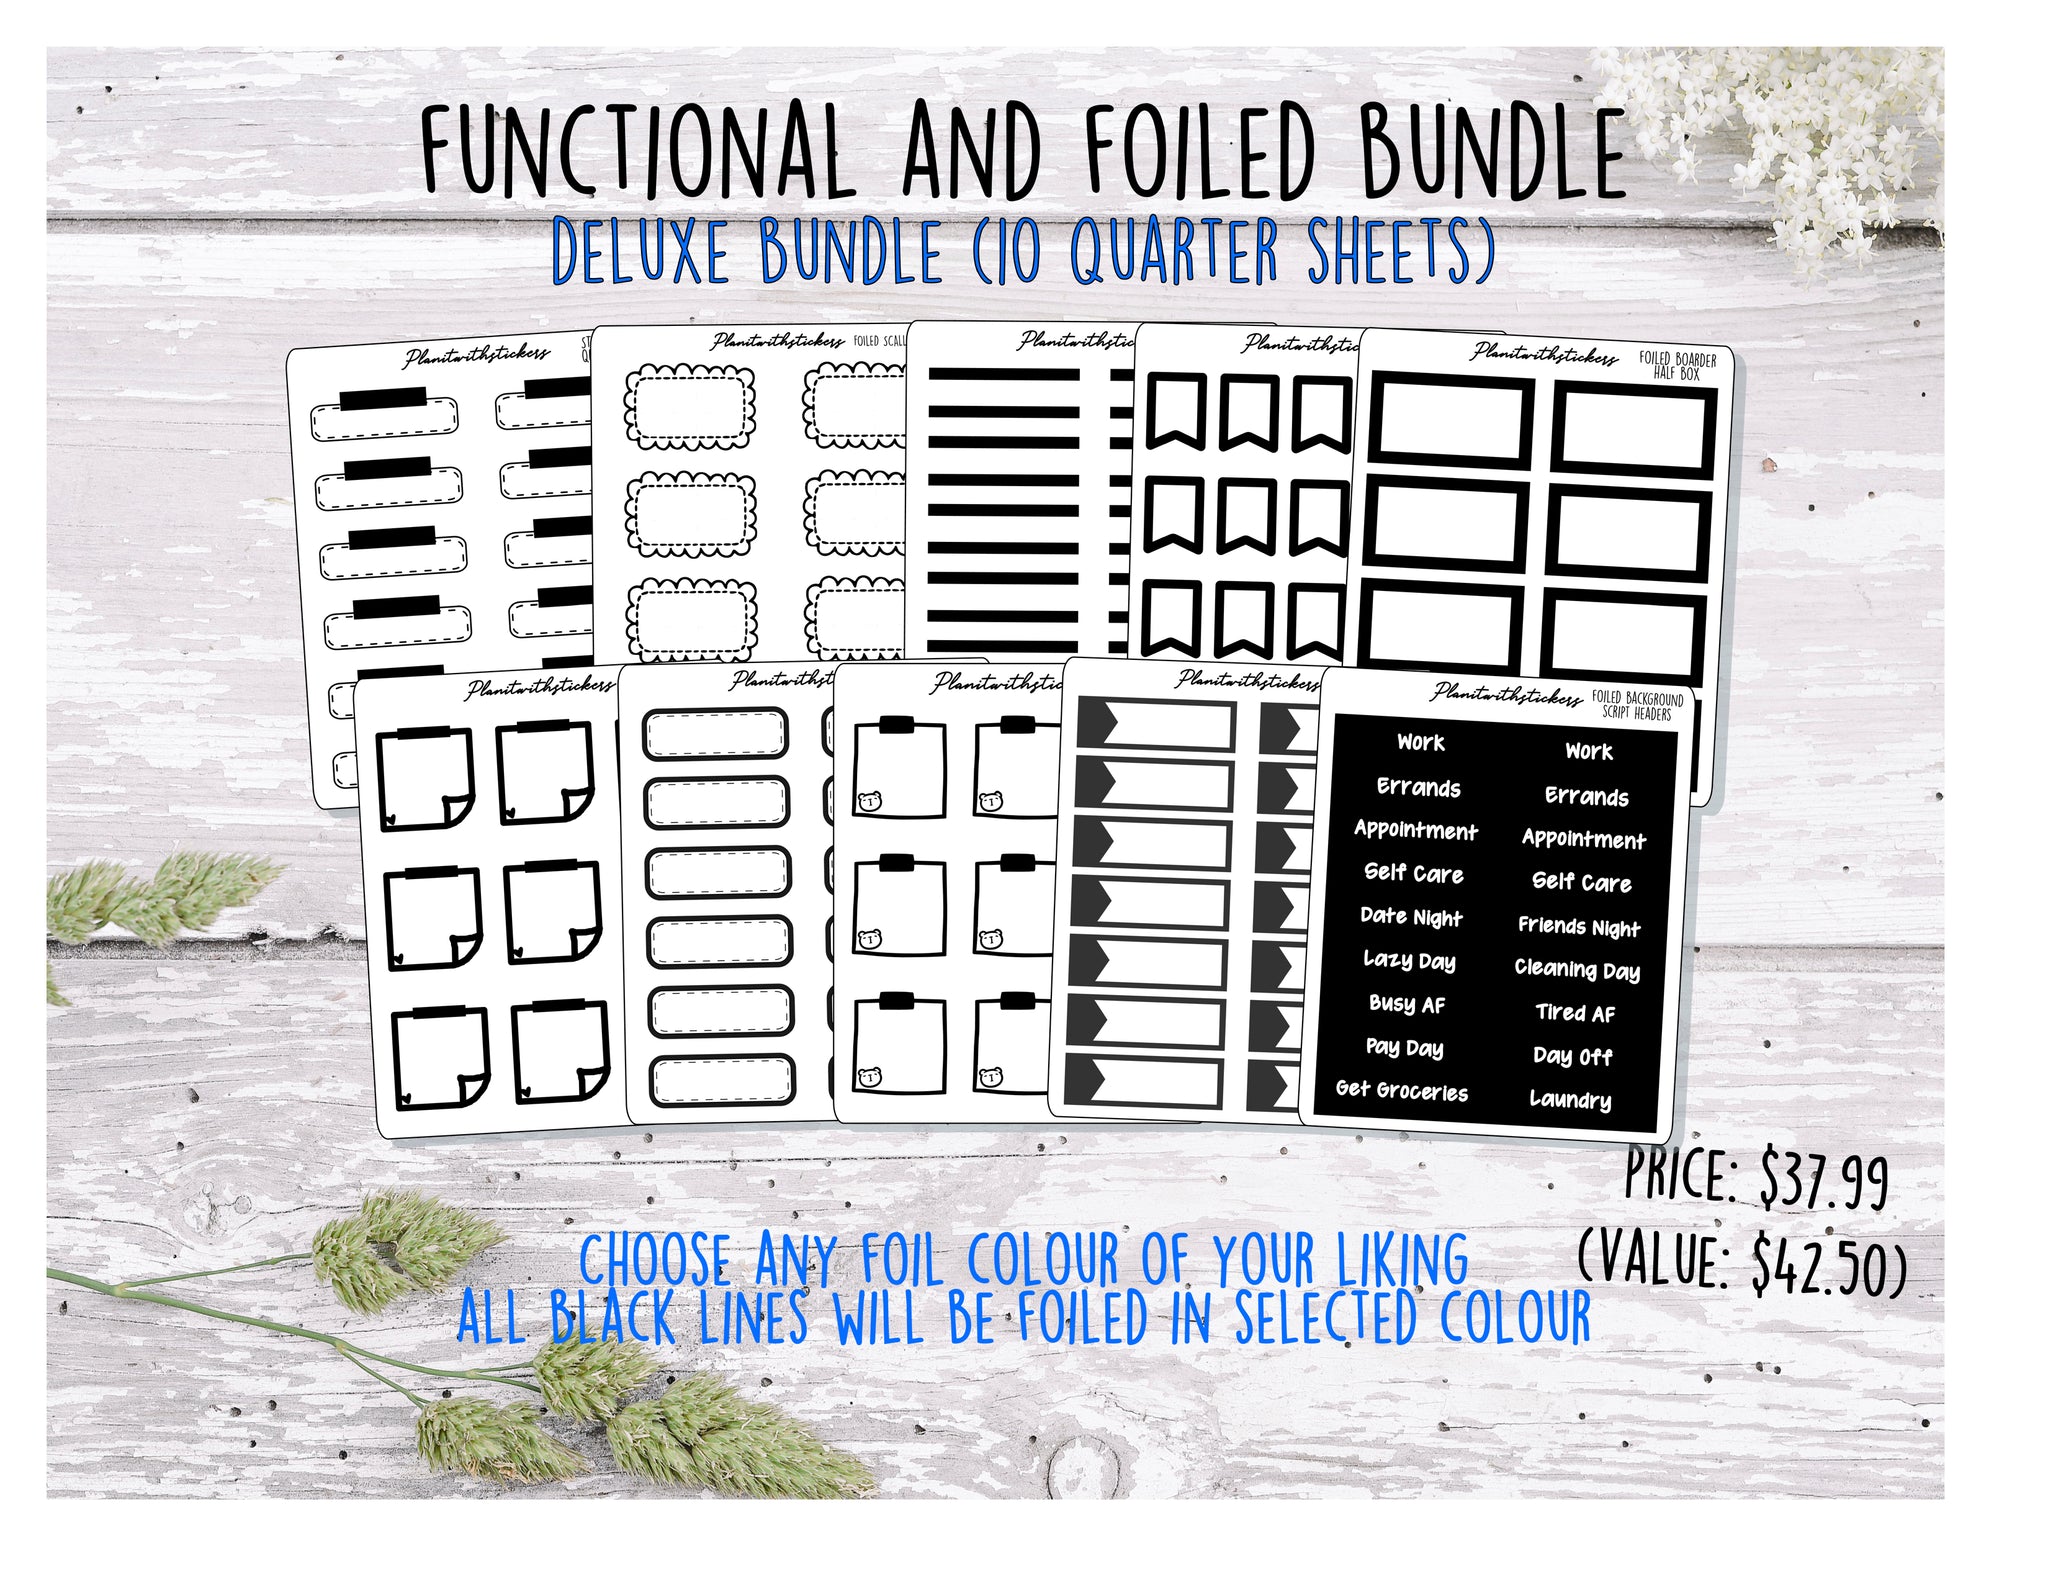 Deluxe FUNCTIONAL FOILED BUNDLE (10 sheets)